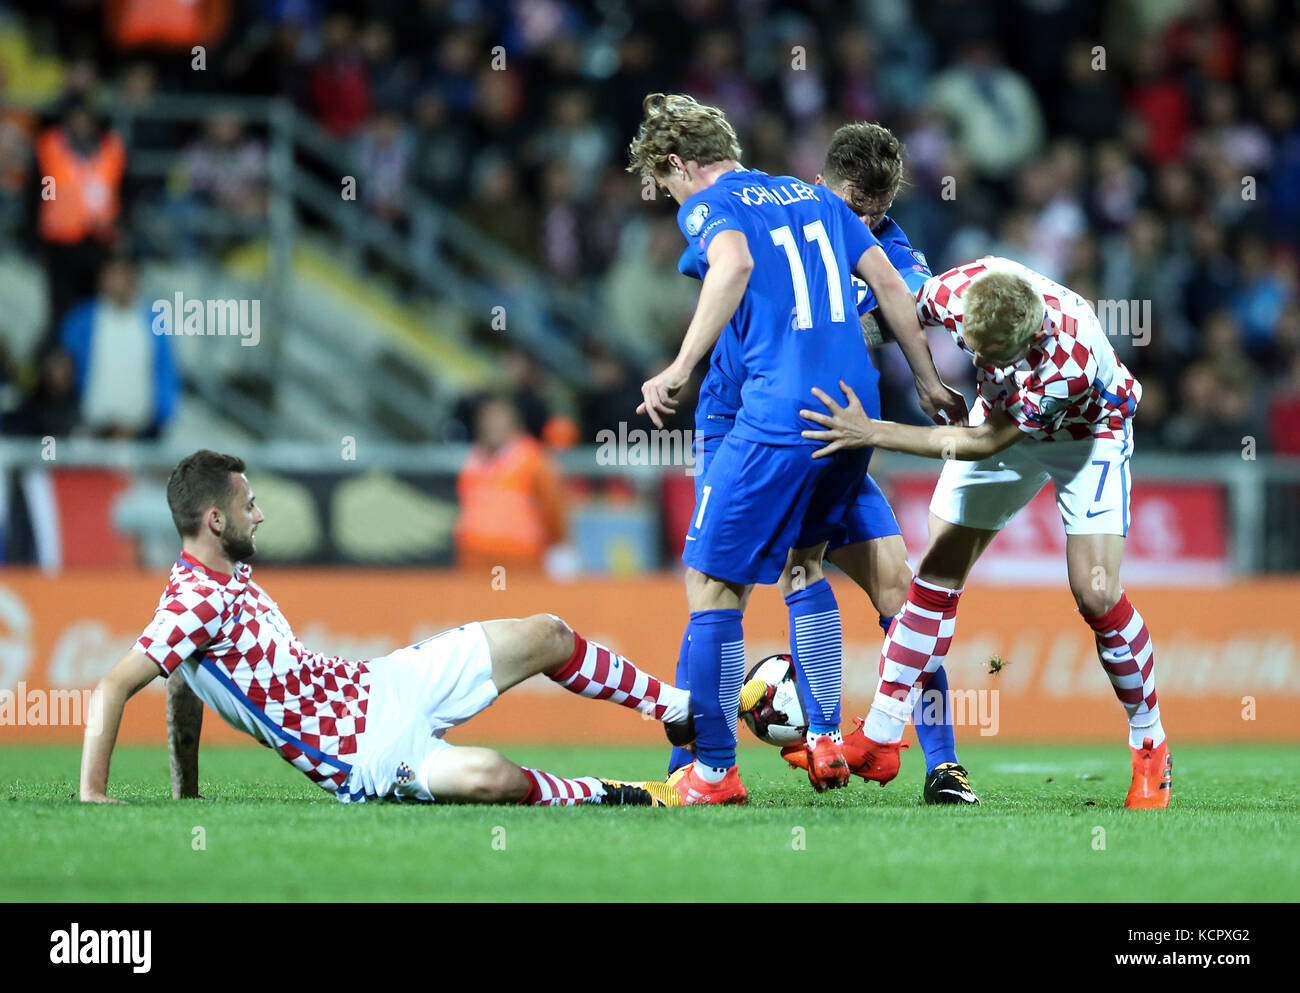 Rijeka. 6th Oct, 2017. Marcelo Brozovic (1st L) and Ivan Rakitic (1st R) of Croatia vie with Rasmus Schuller (2nd L) of Finland during 2018 FIFA World Cup Russia qualifiers match between Croatia and Finland in Rijeka, Croatia on Oct. 6, 2017. The match ended with a 1-1 draw. Credit: Sanjin Strukic/Xinhua/Alamy Live News Stock Photo